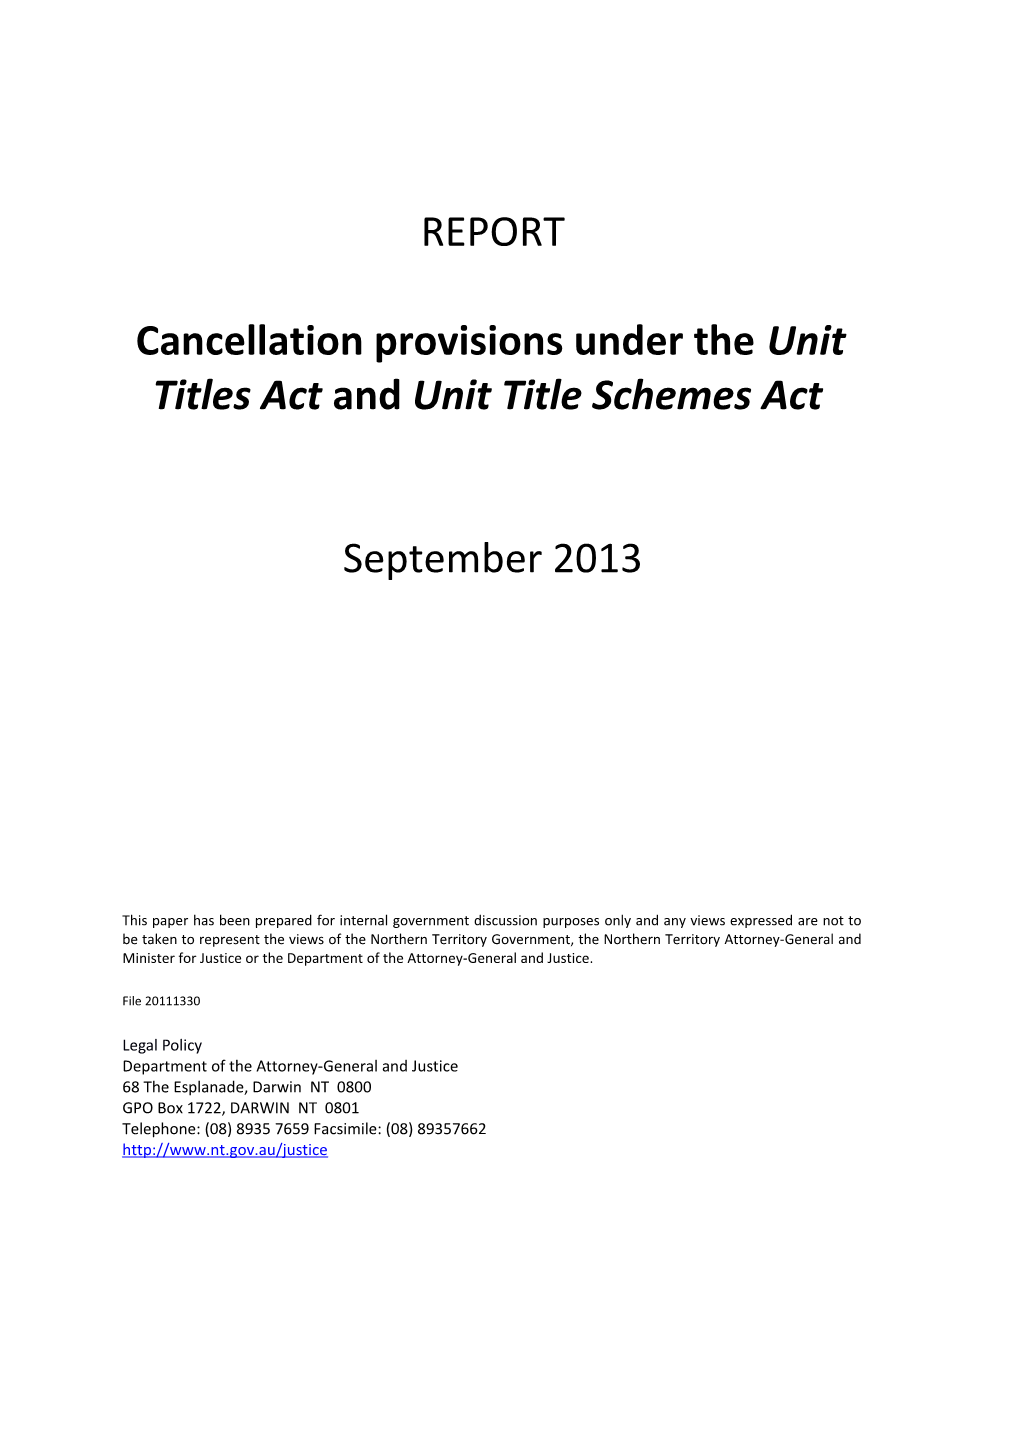 Review of the Cancellation Provisions Under The